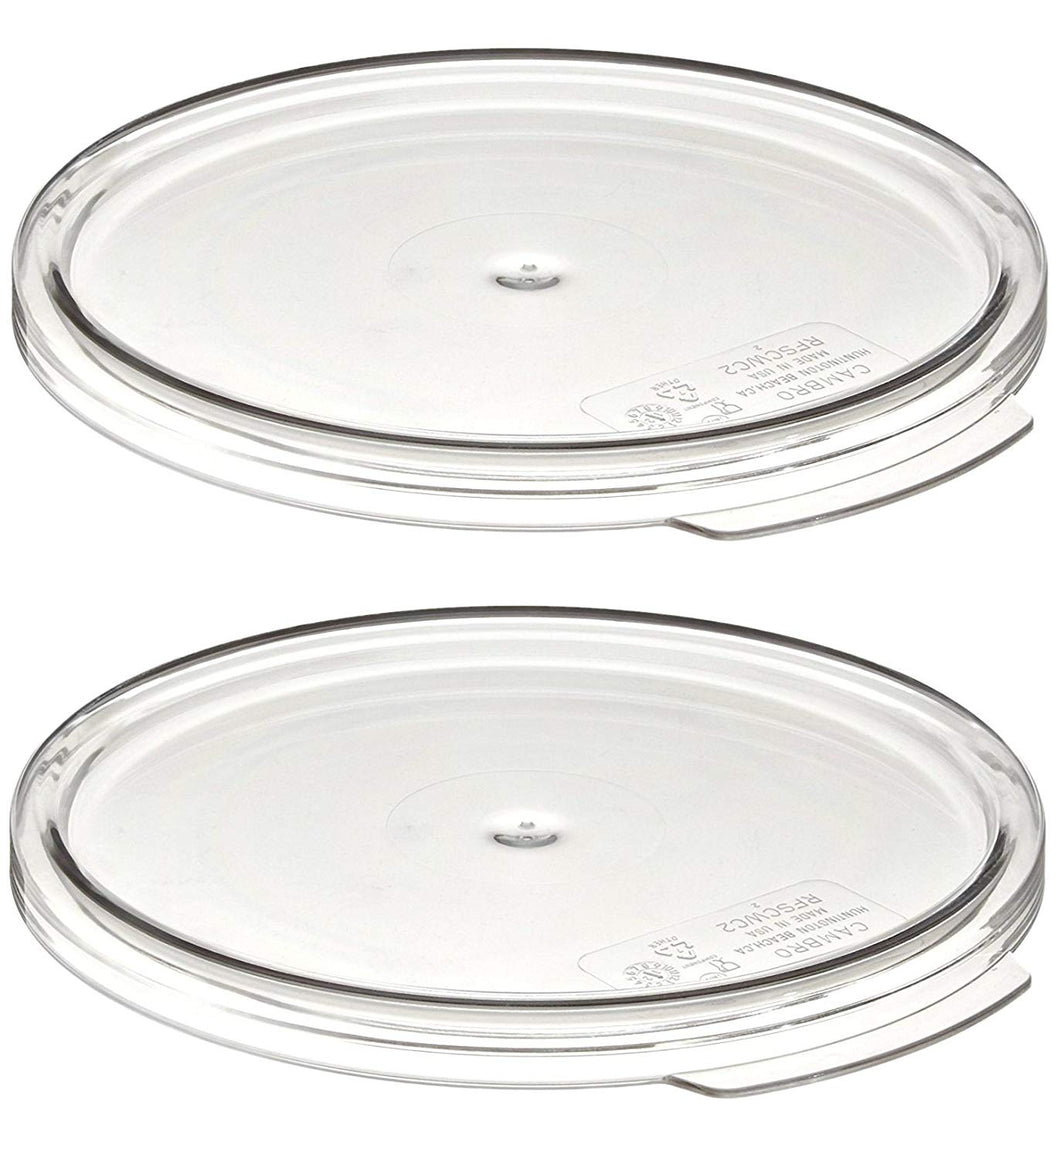 Cambro RFSCWC12135 Round Camwear Covers, Set of 2 (For 12, 18 & 22-Quart Storage Containers, Polycarbonate, Clear)